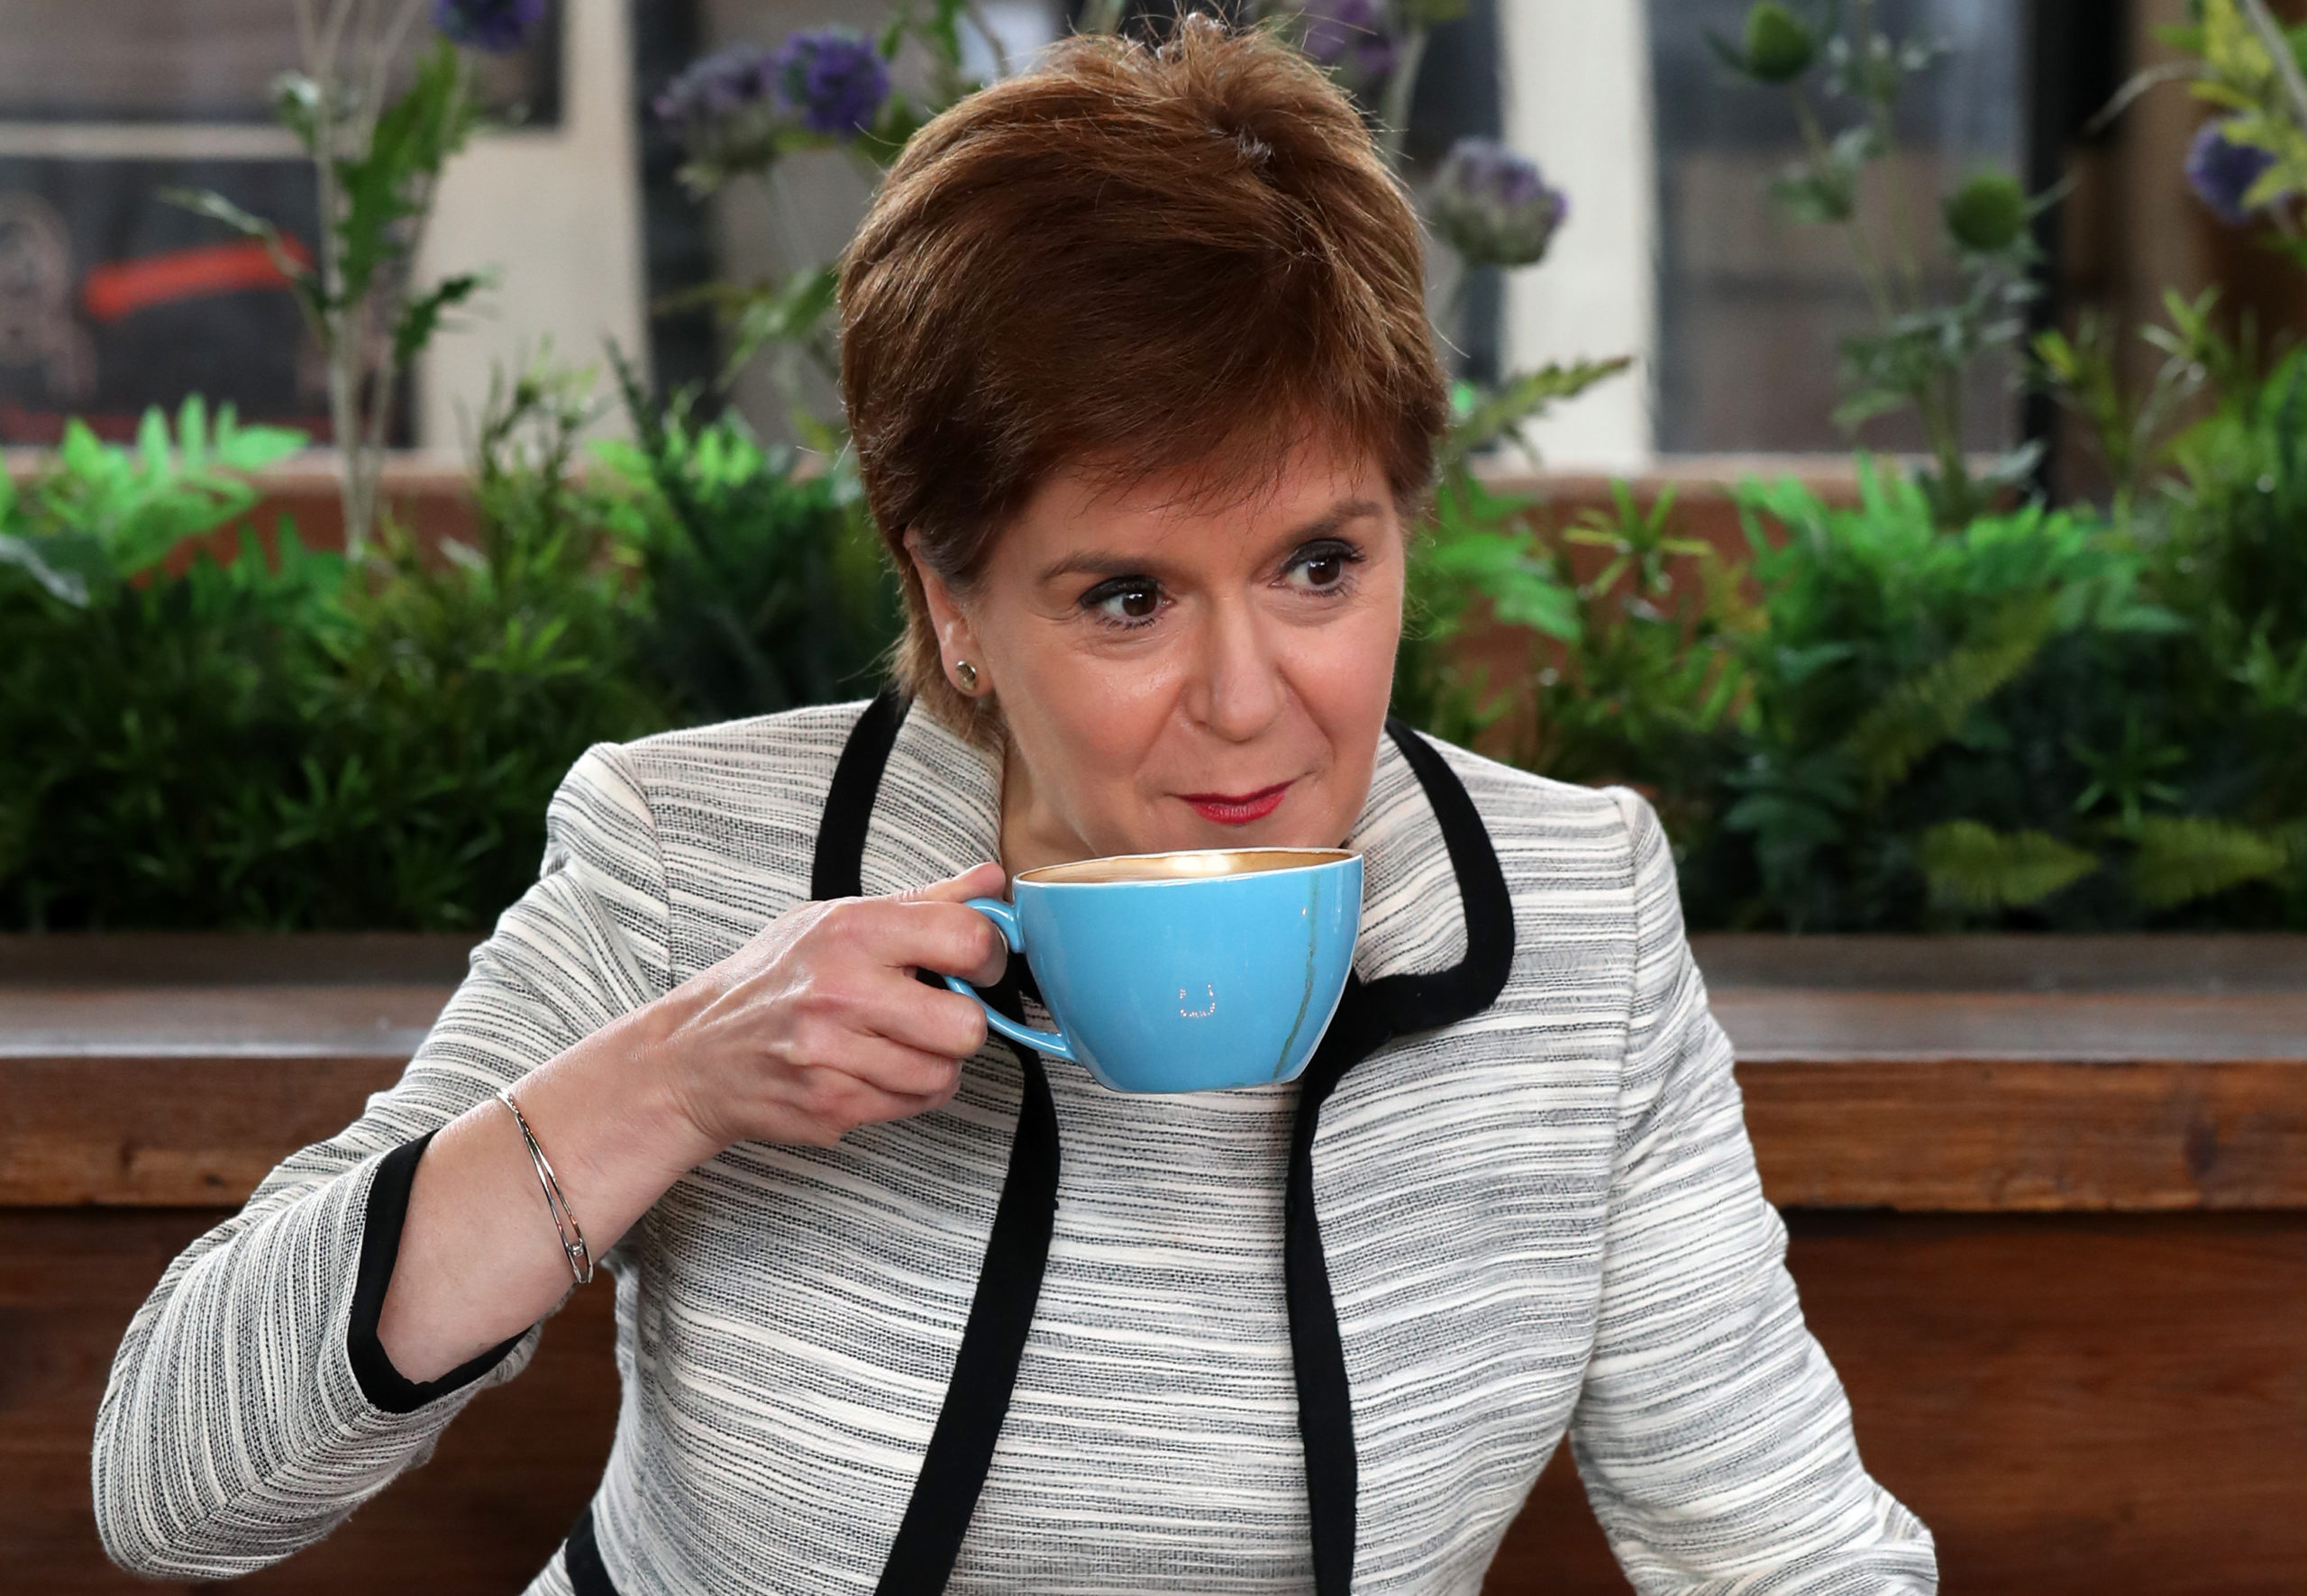 First Minister enjoys coffee as pavement cafes reopened on Monday. (Getty)